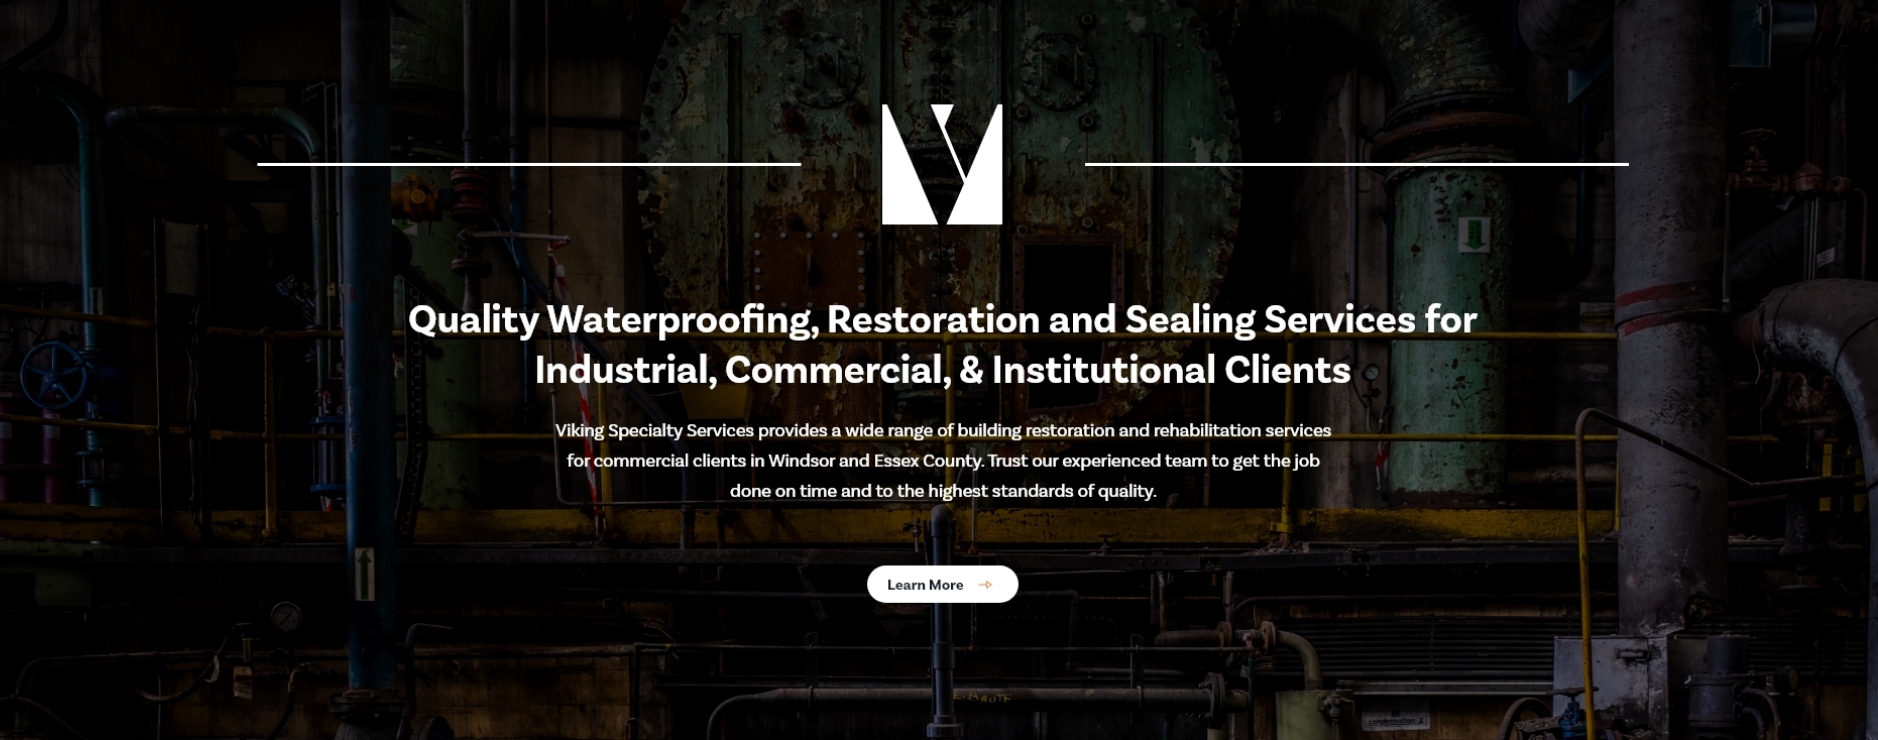 Viking Specialty Services - Homepage